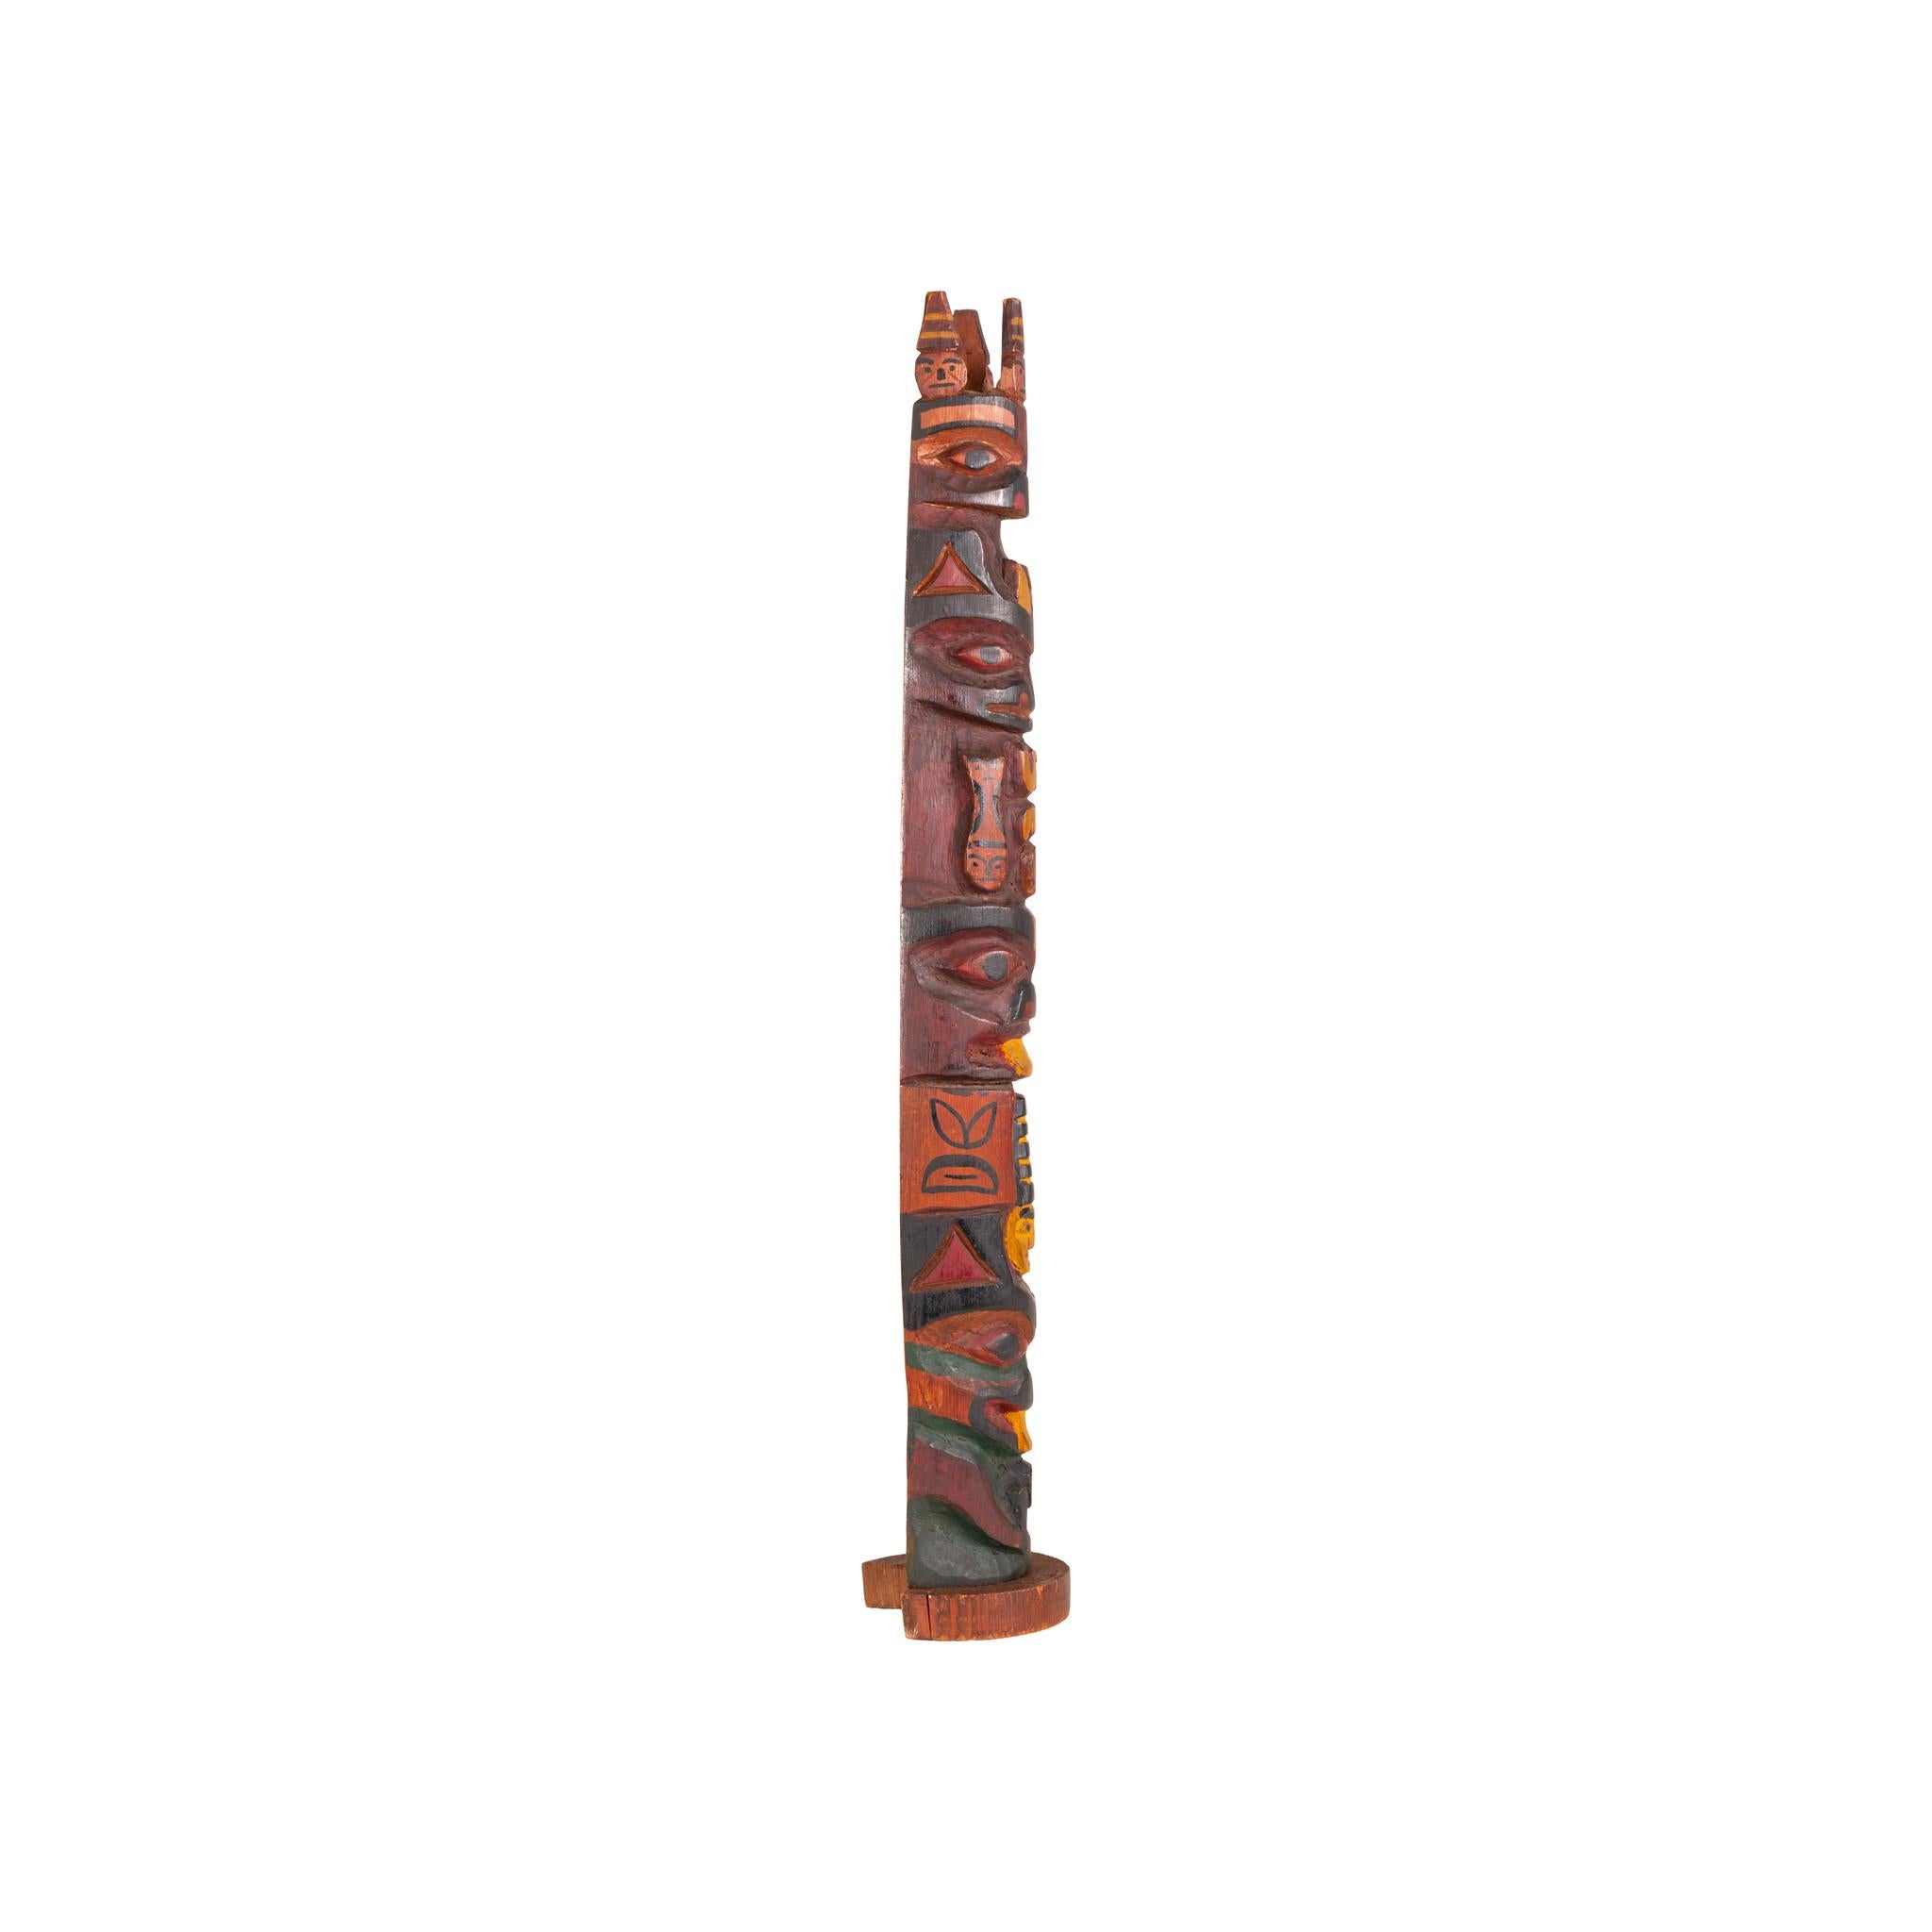 Moses Alexcee was a prolific Tsimshian maker from Prince Rupert who frequently carved for William Webber, the owner of the iconic Thunderbird Scenery Shop in Vancouver, BC. Alexcee often carved Tsimshian-style models of Haida totem poles. Note the